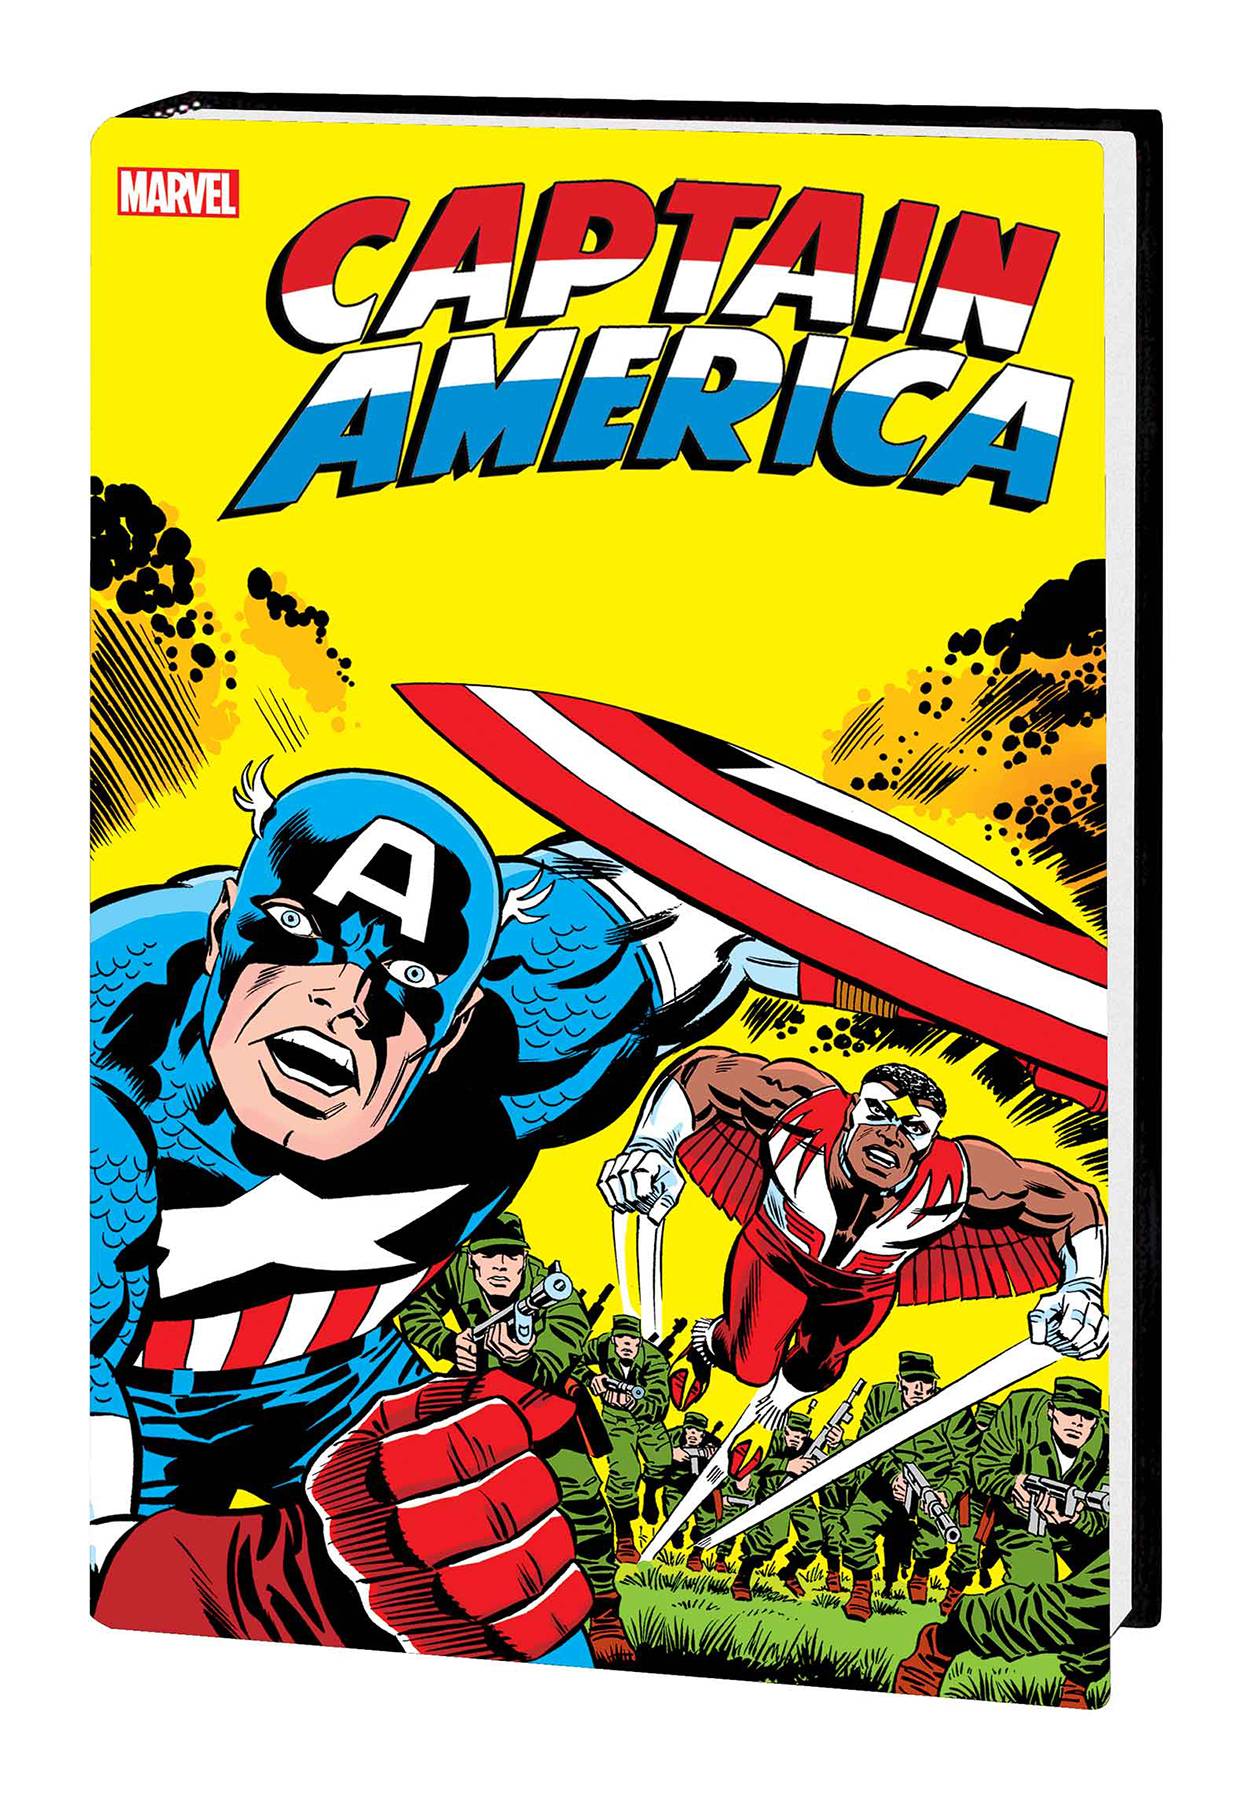 CAPTAIN AMERICA BY JACK KIRBY OMNIBUS HC